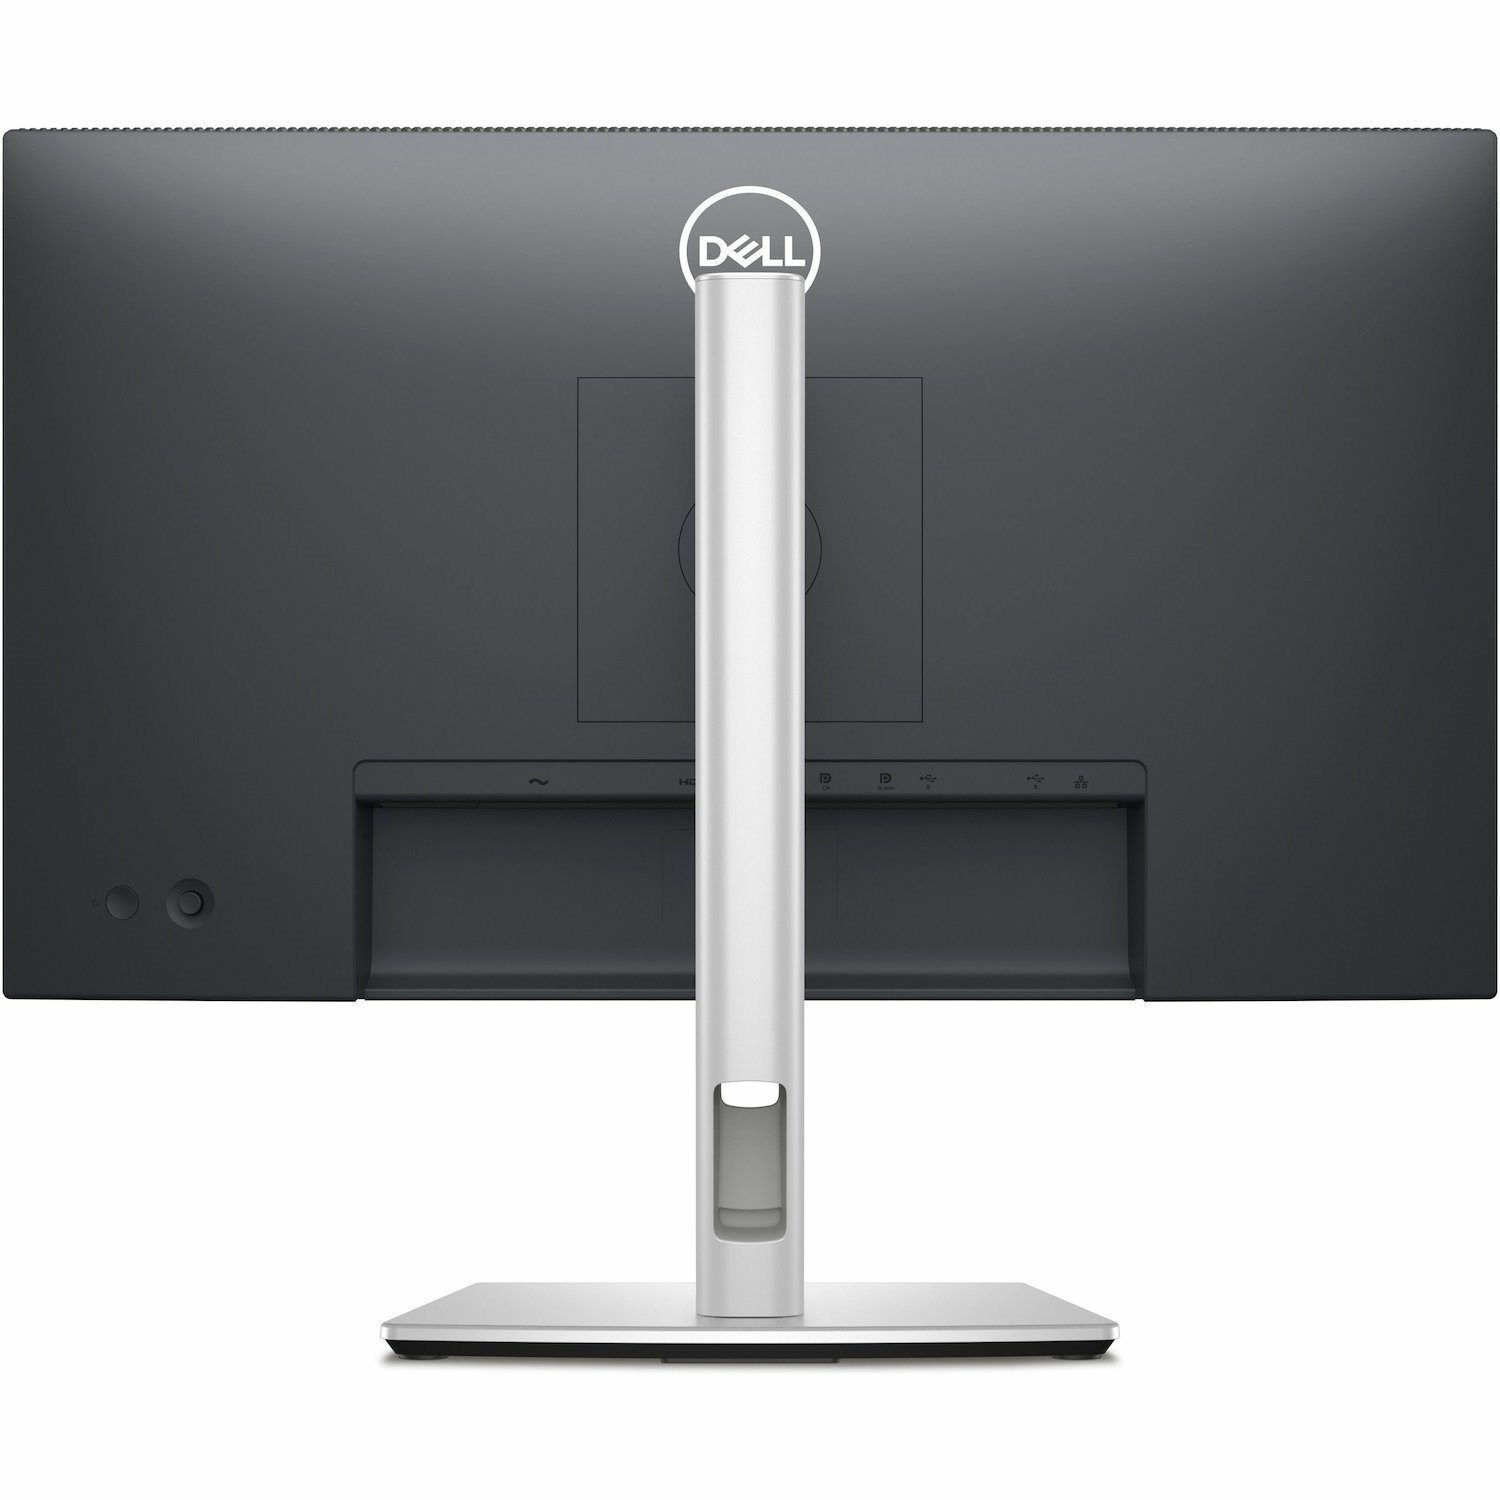 Dell P2425HE 24" Class Full HD LED Monitor - 16:9 - Black, Silver